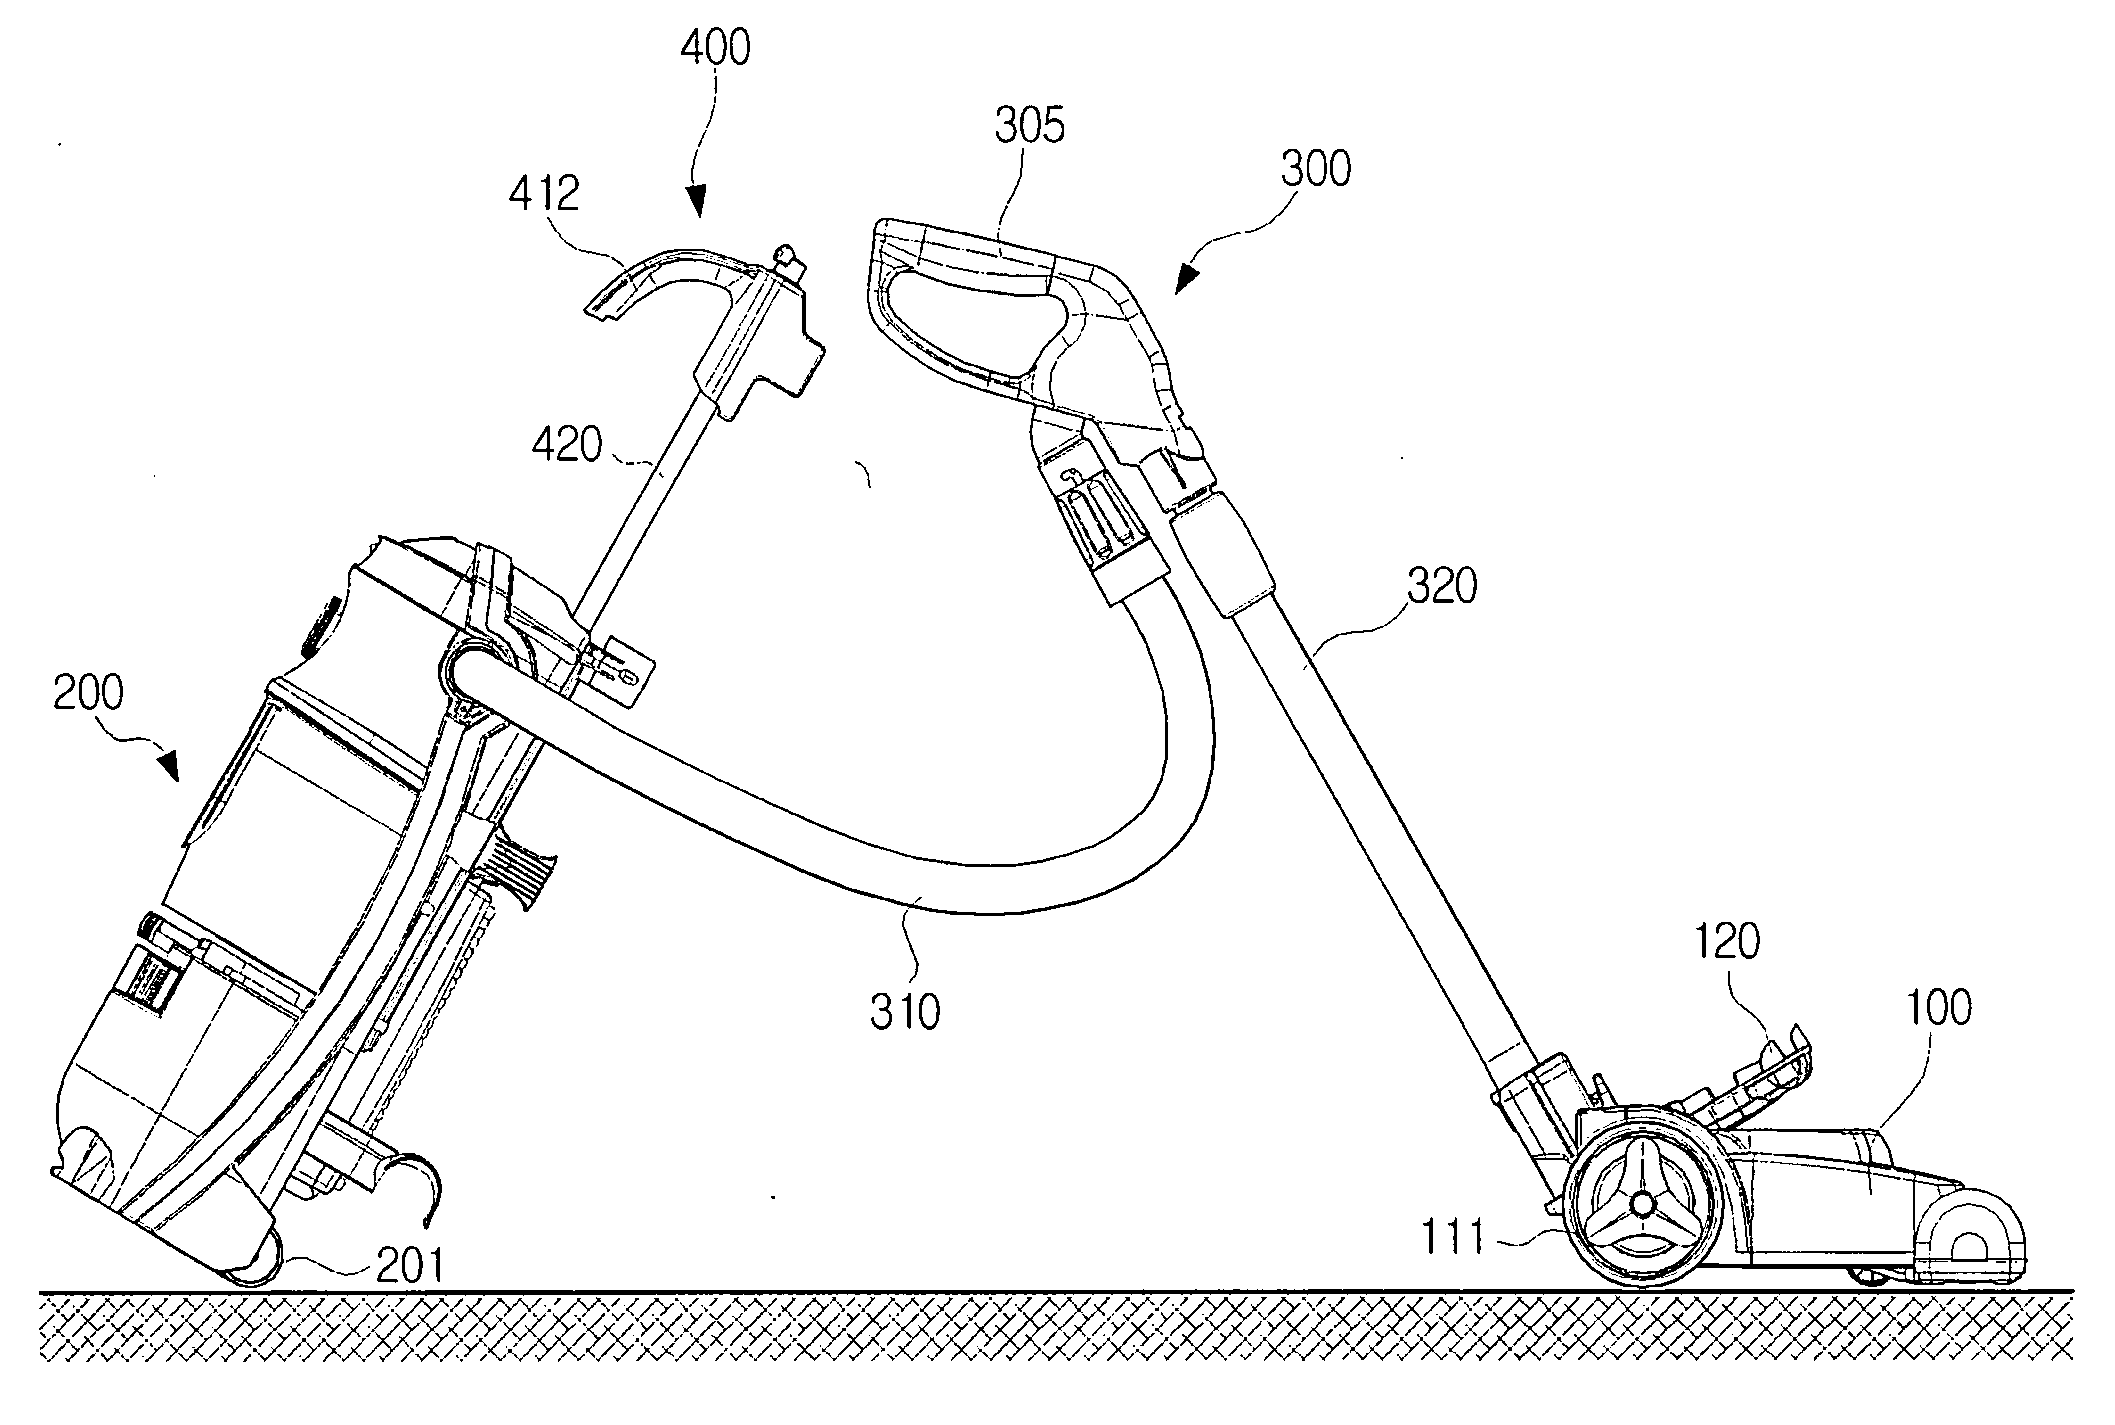 Suction port assembly of vacuum cleaner